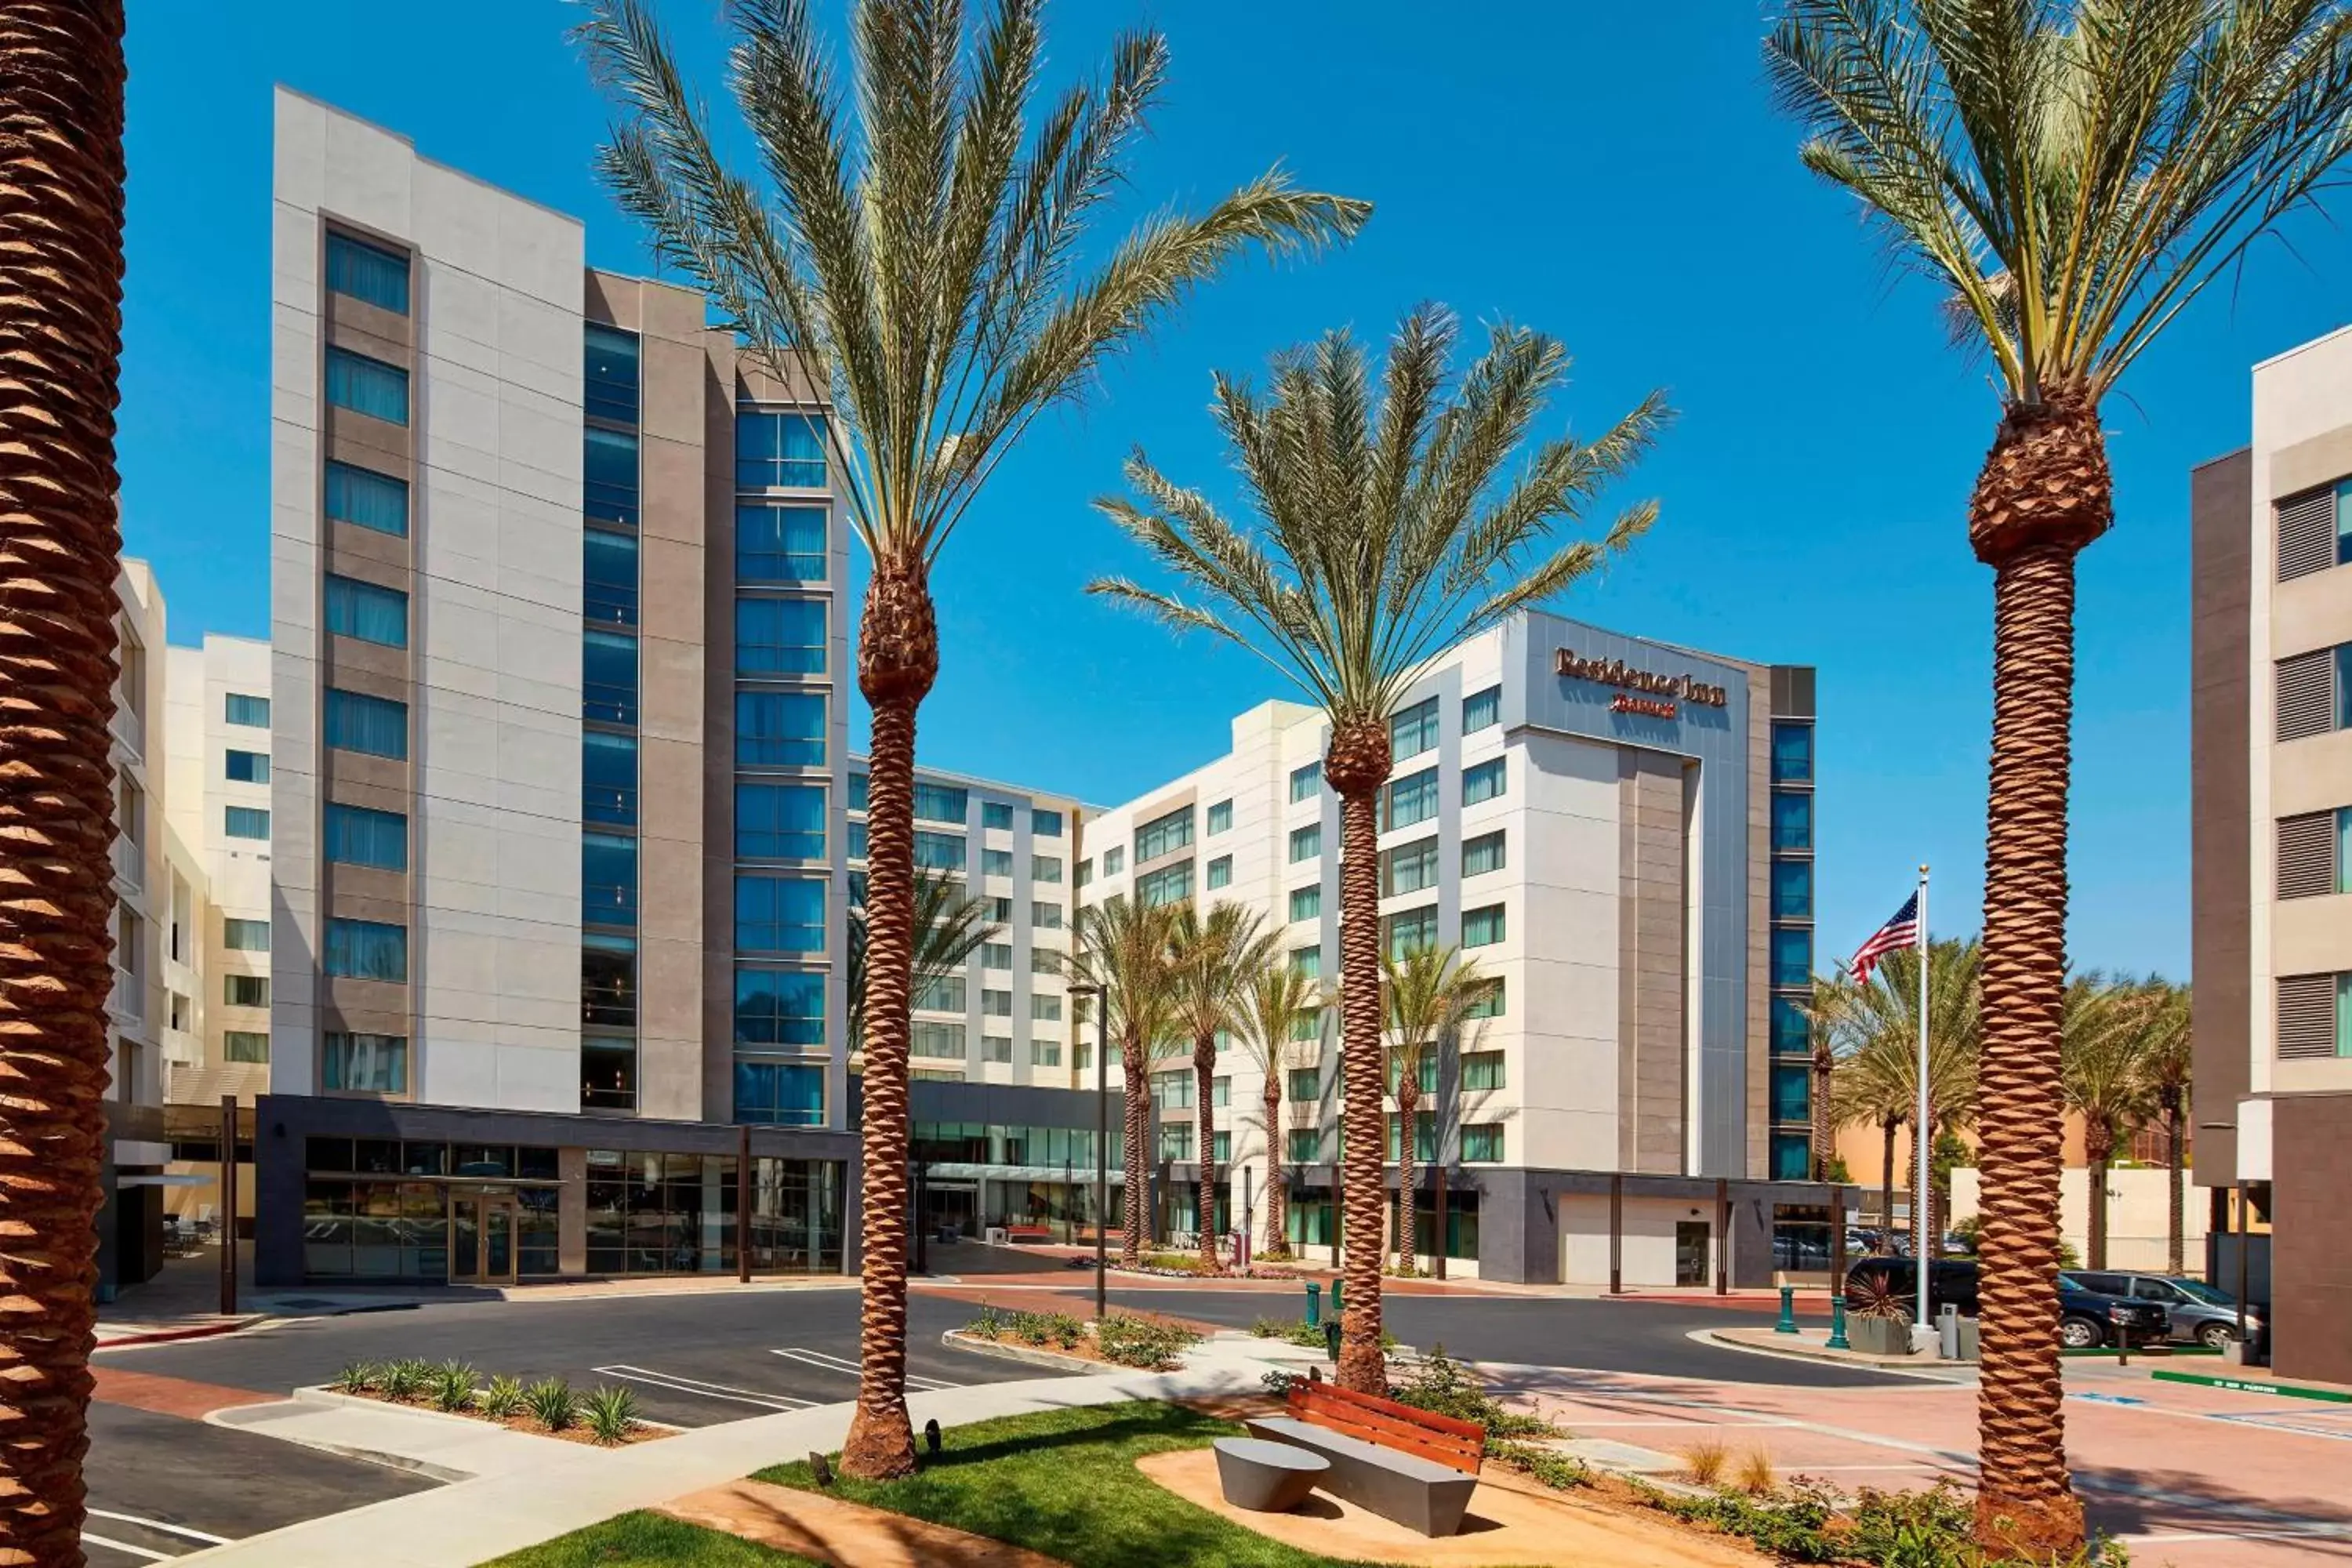 Property building in Residence Inn by Marriott at Anaheim Resort/Convention Center